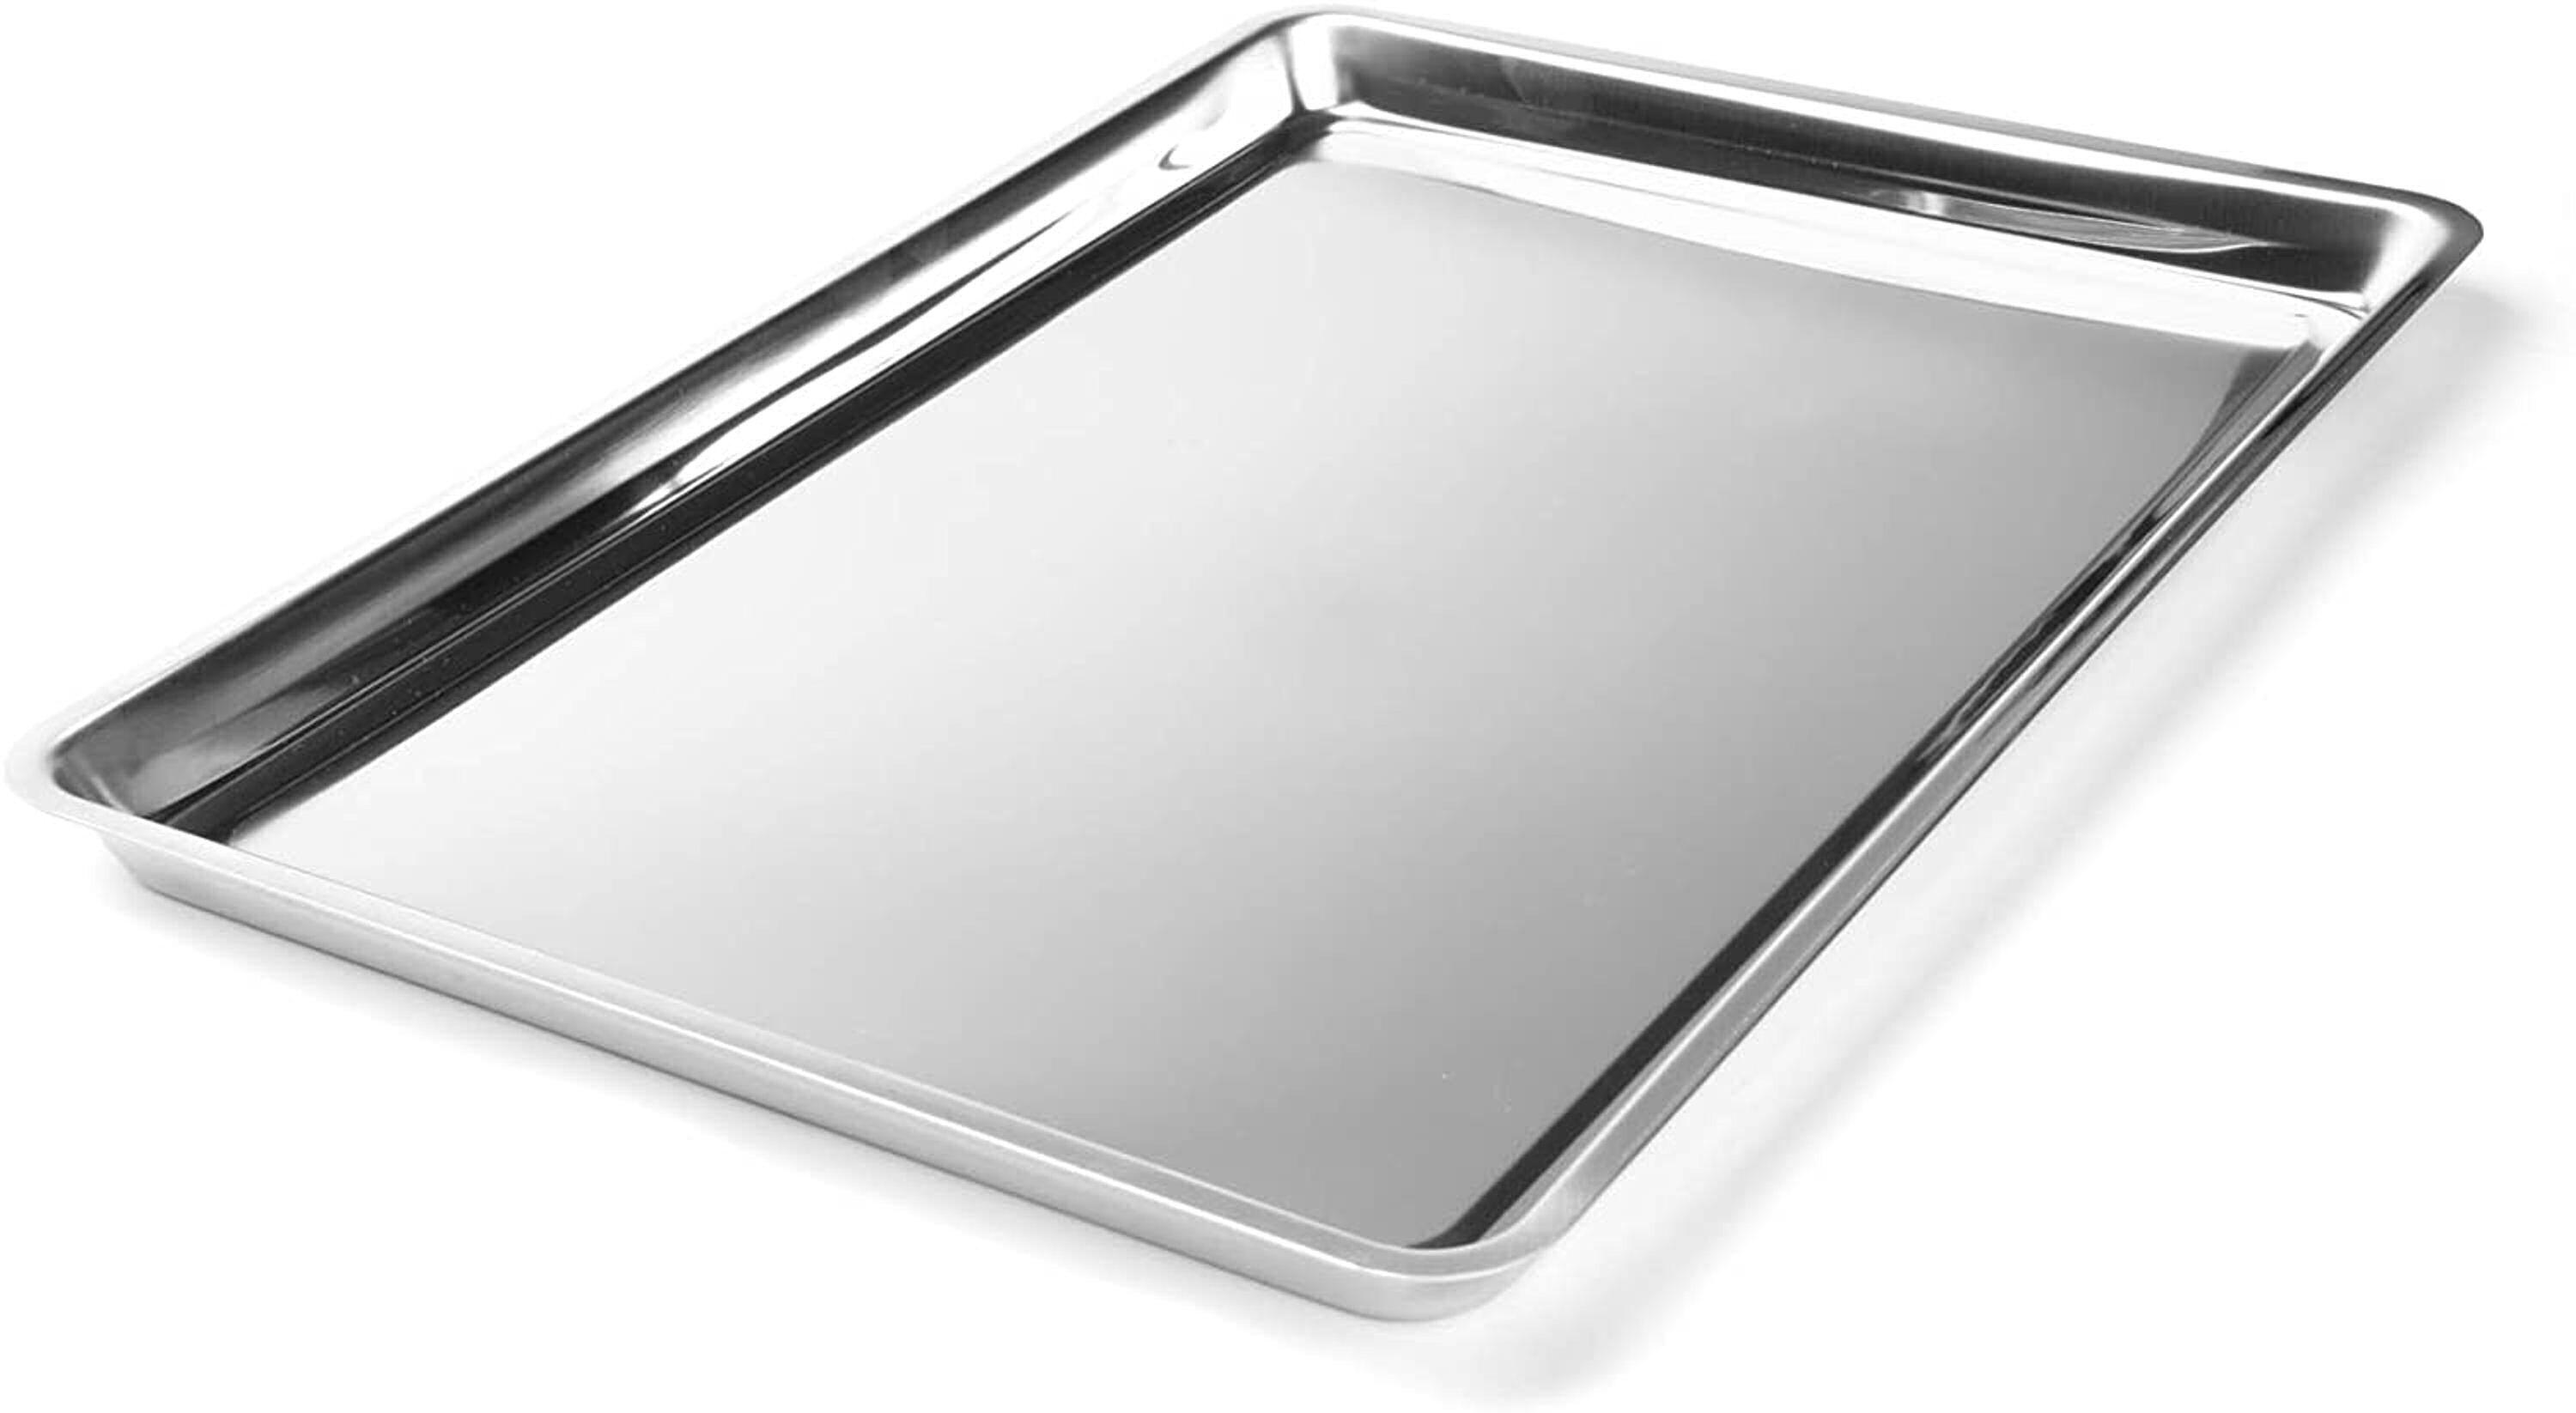 Stainless Steel Cookie Sheet etched with a recipe, Heirloom pan